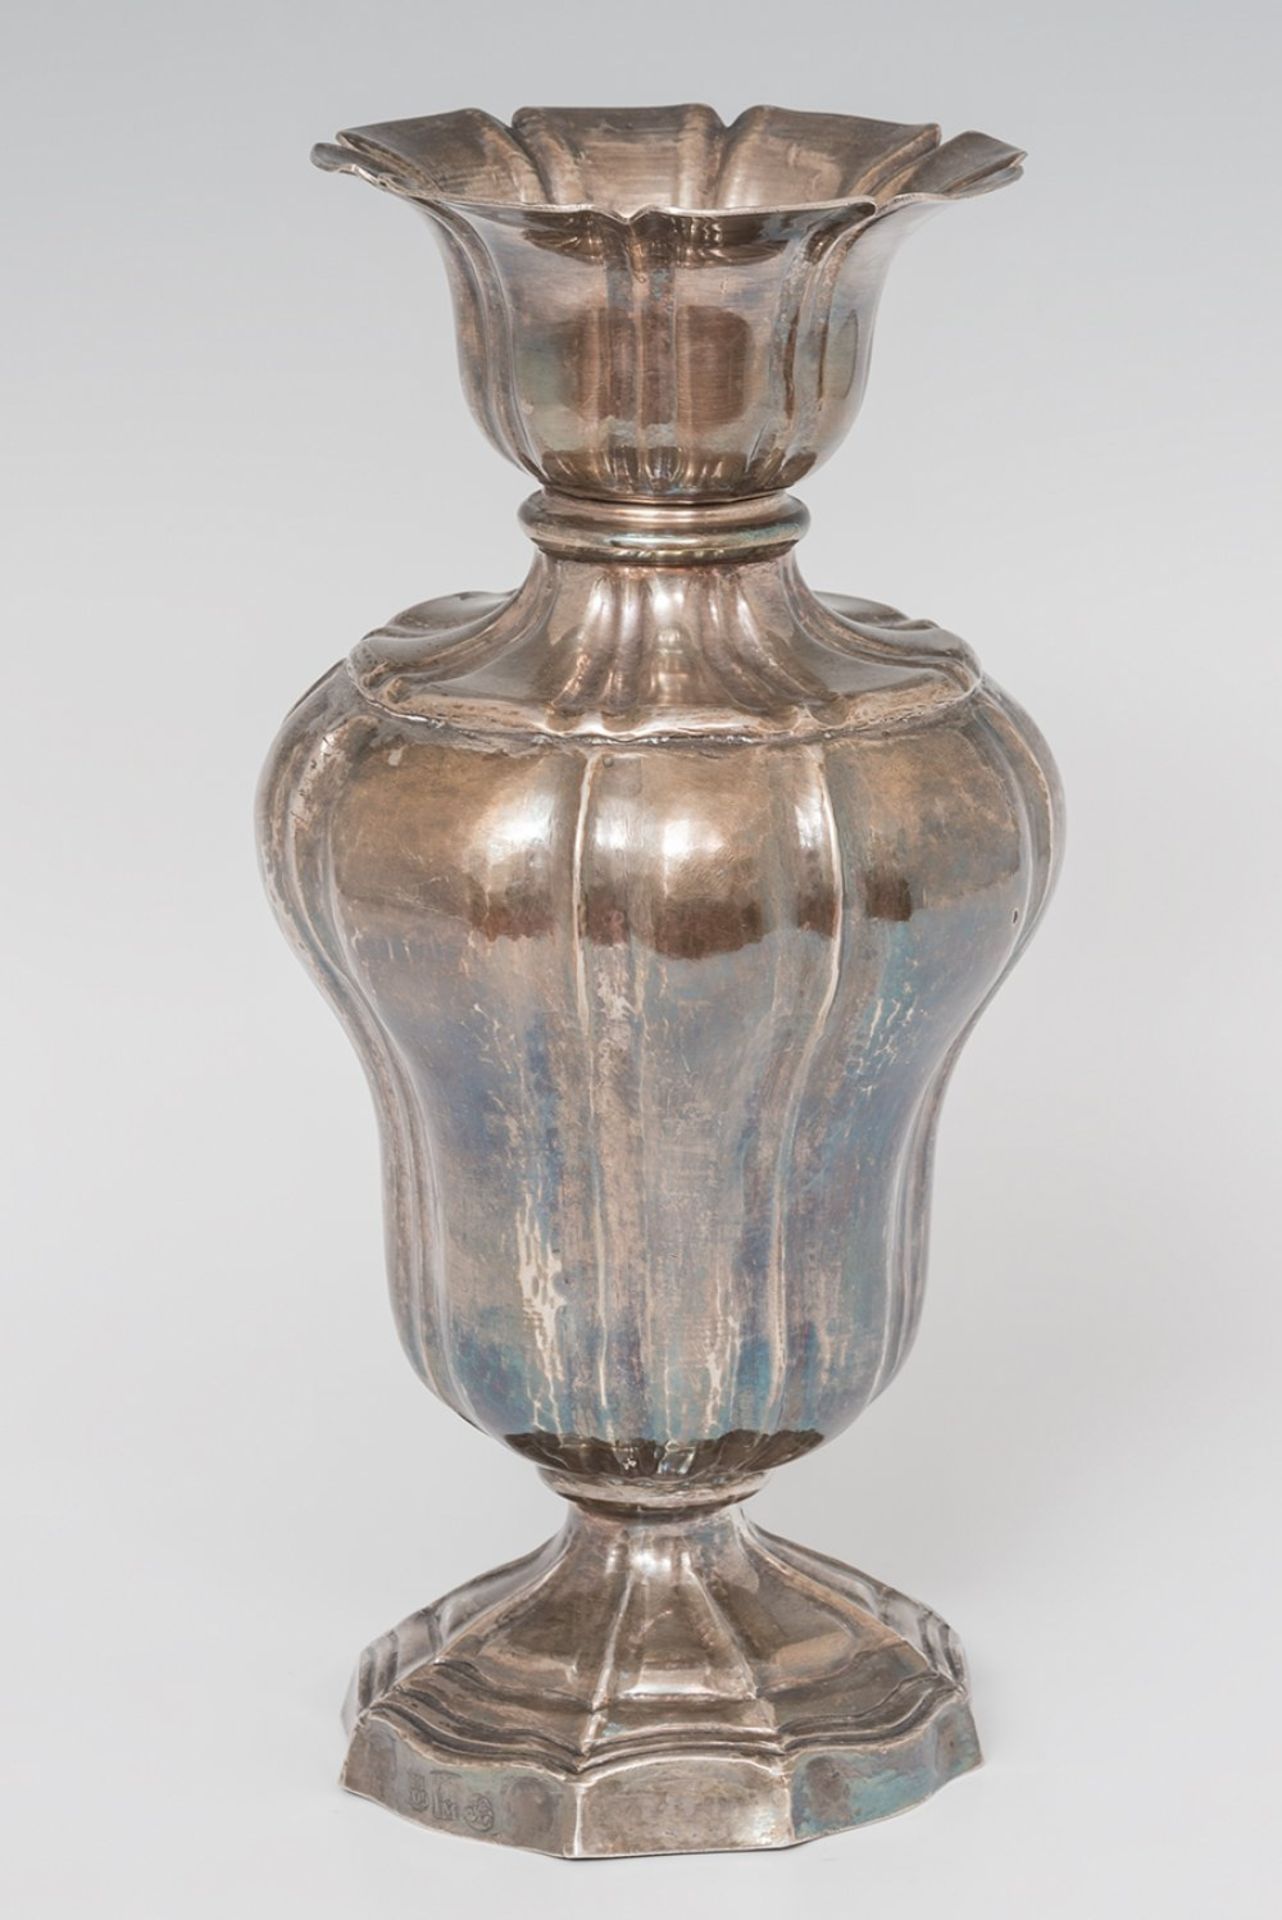 Altar vase in stamped silver. Mexico. 18th centuryWeight: 959.1 g. Measure: 27.5 x 14 cm.Vase - Image 3 of 6